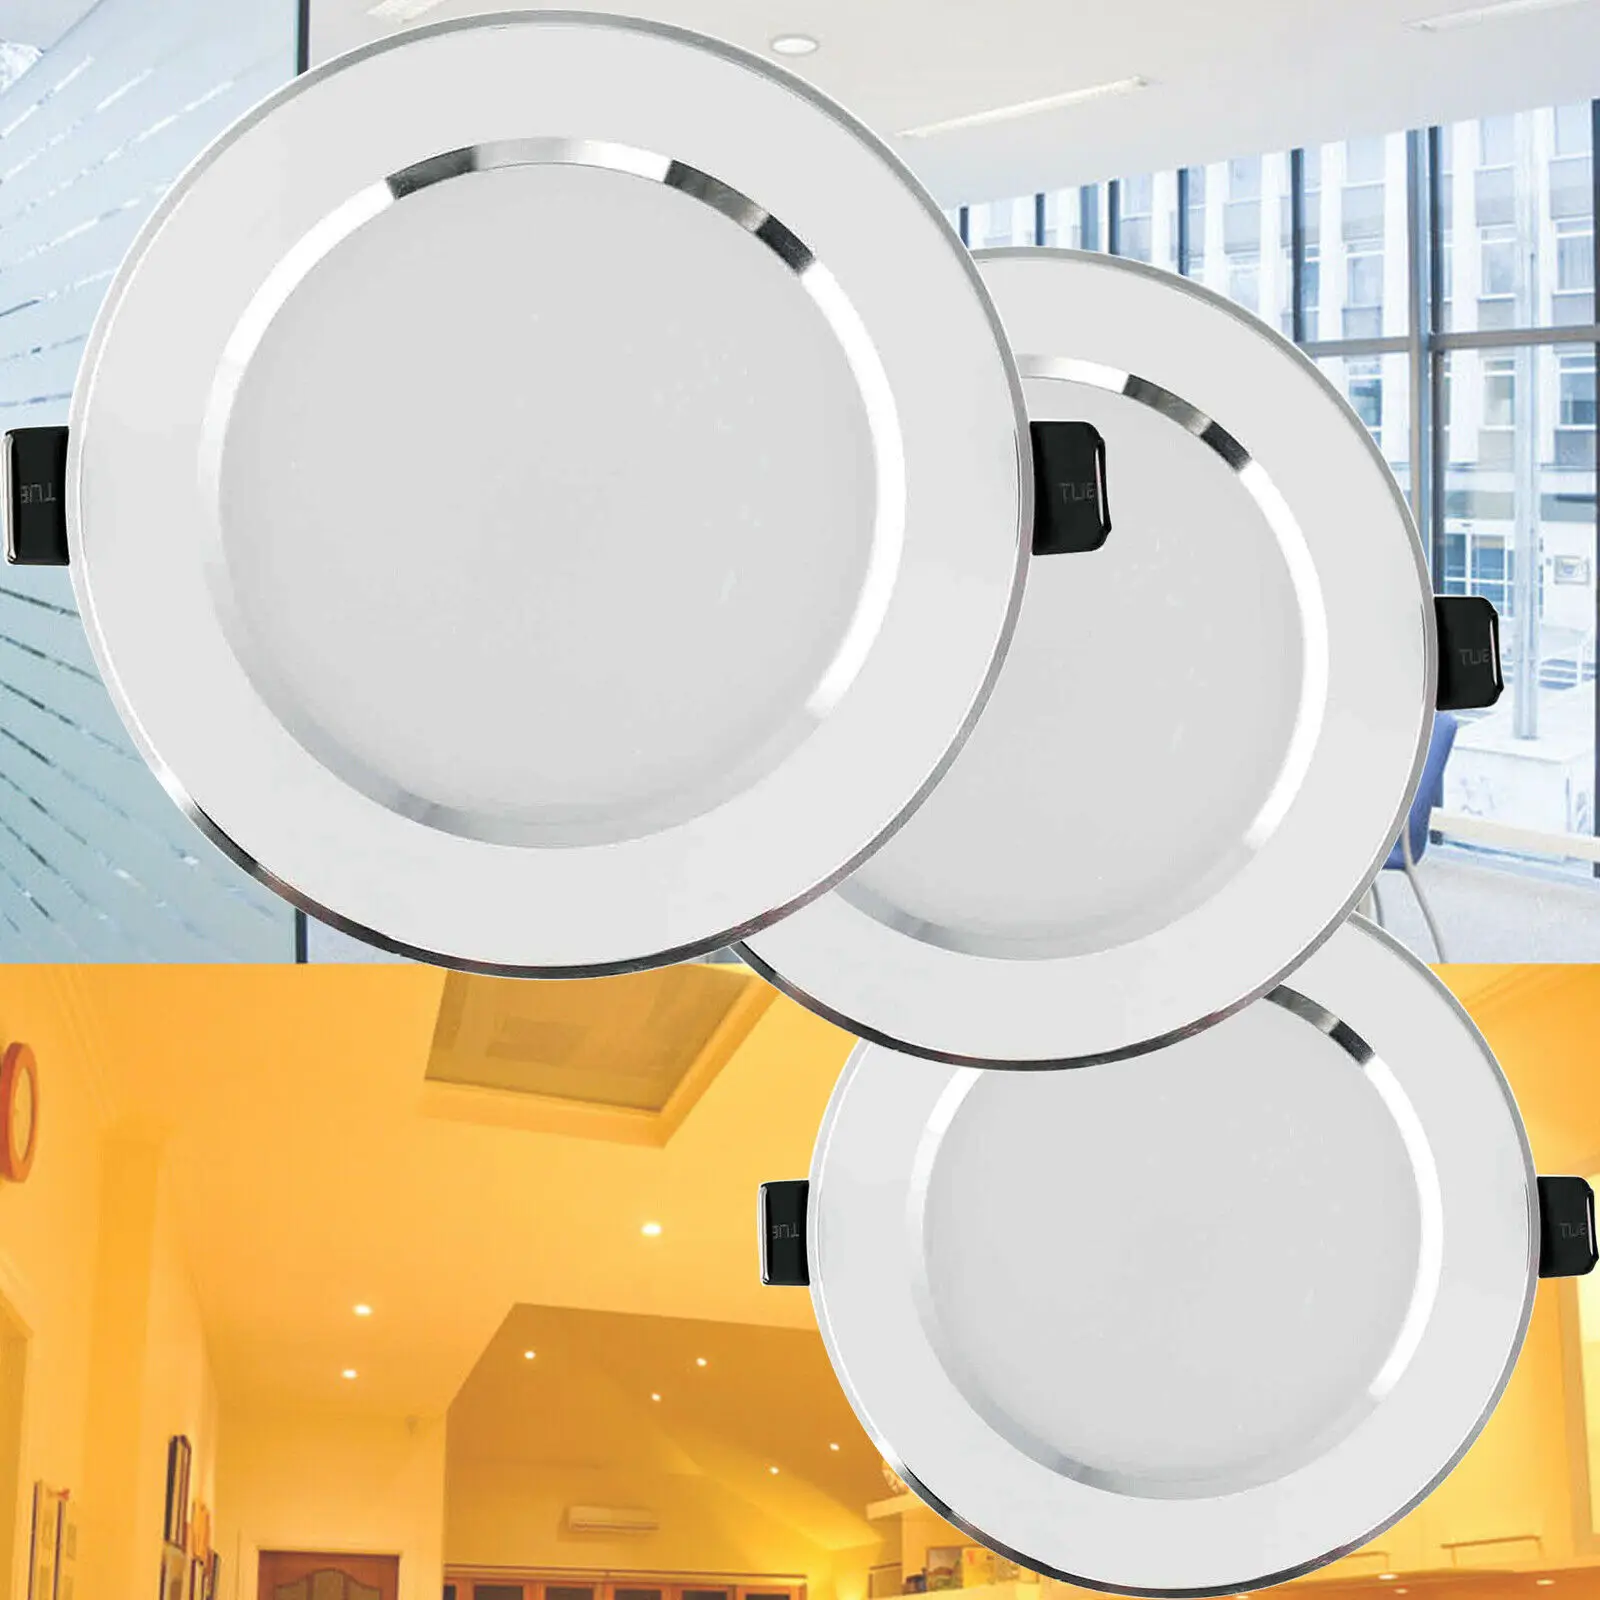 Dimmable  LED Recessed Ceiling Downlight 3W 5W 7W 9W 12W 15W 18W 21W Light Silver Lamps 85-265V Bright Cool Neutral Warm White